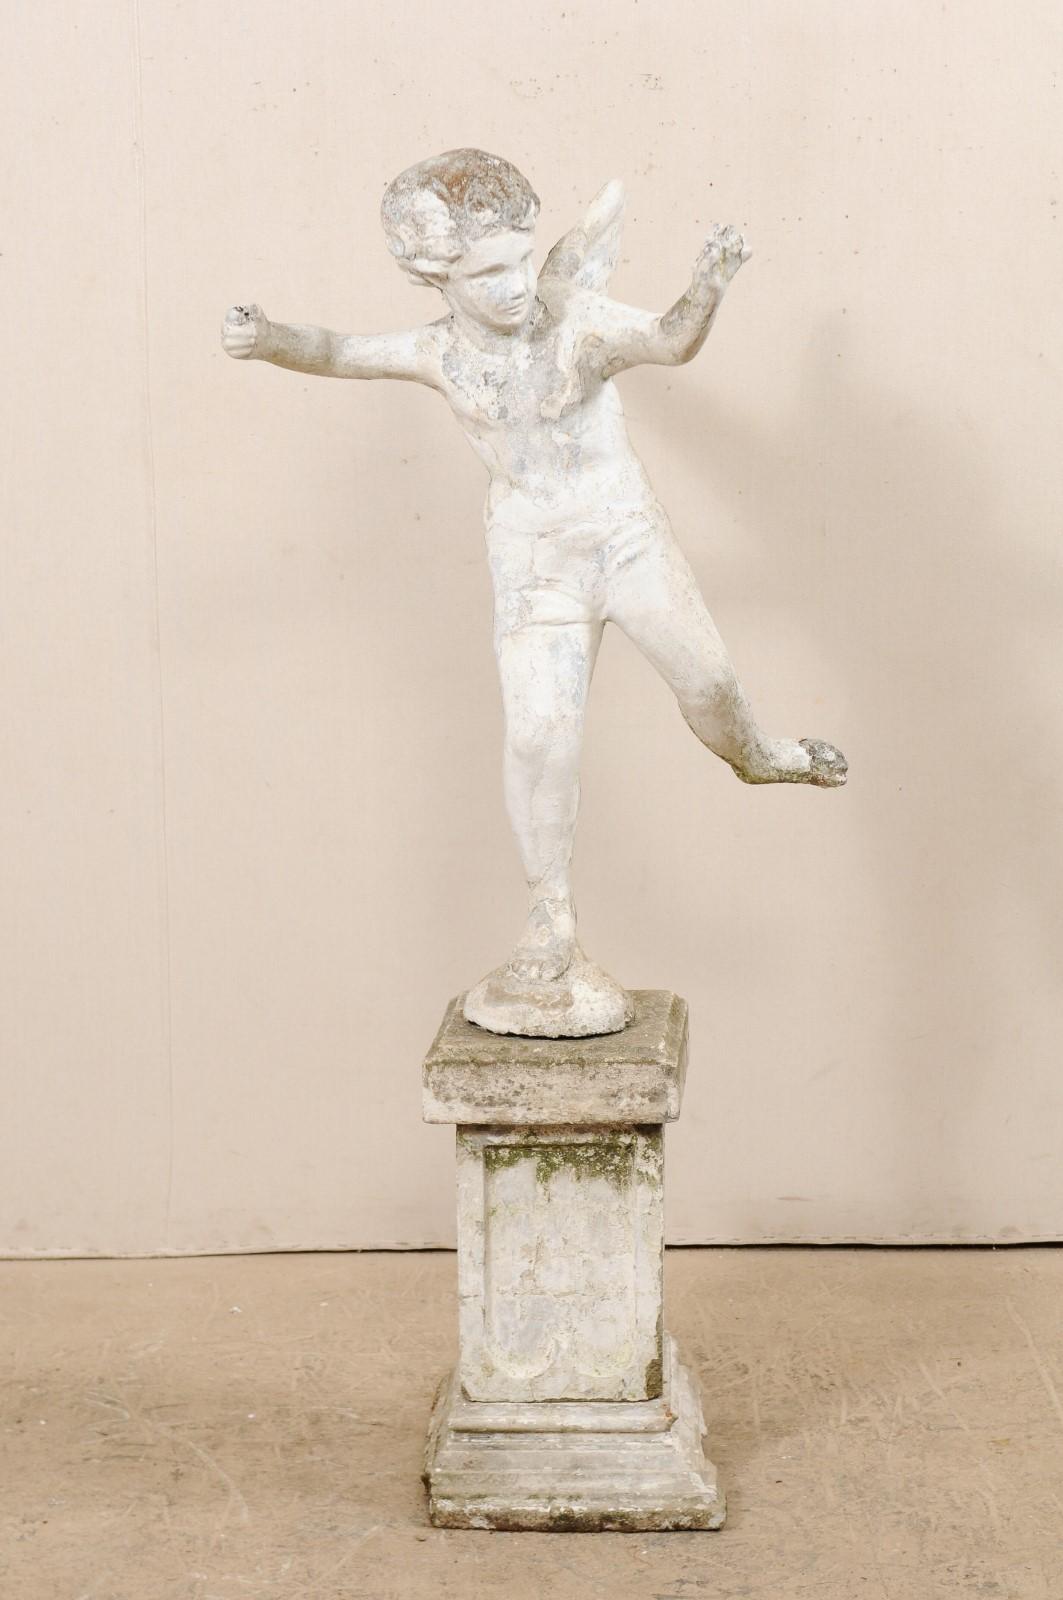 A tall French garden sculpture of a winged boy angel from the early 20th century. This antique statue from France sweetly depicts the figure of Cupid with arms raised as if he would be shooting an arrow, and one leg raised. The statue is presented